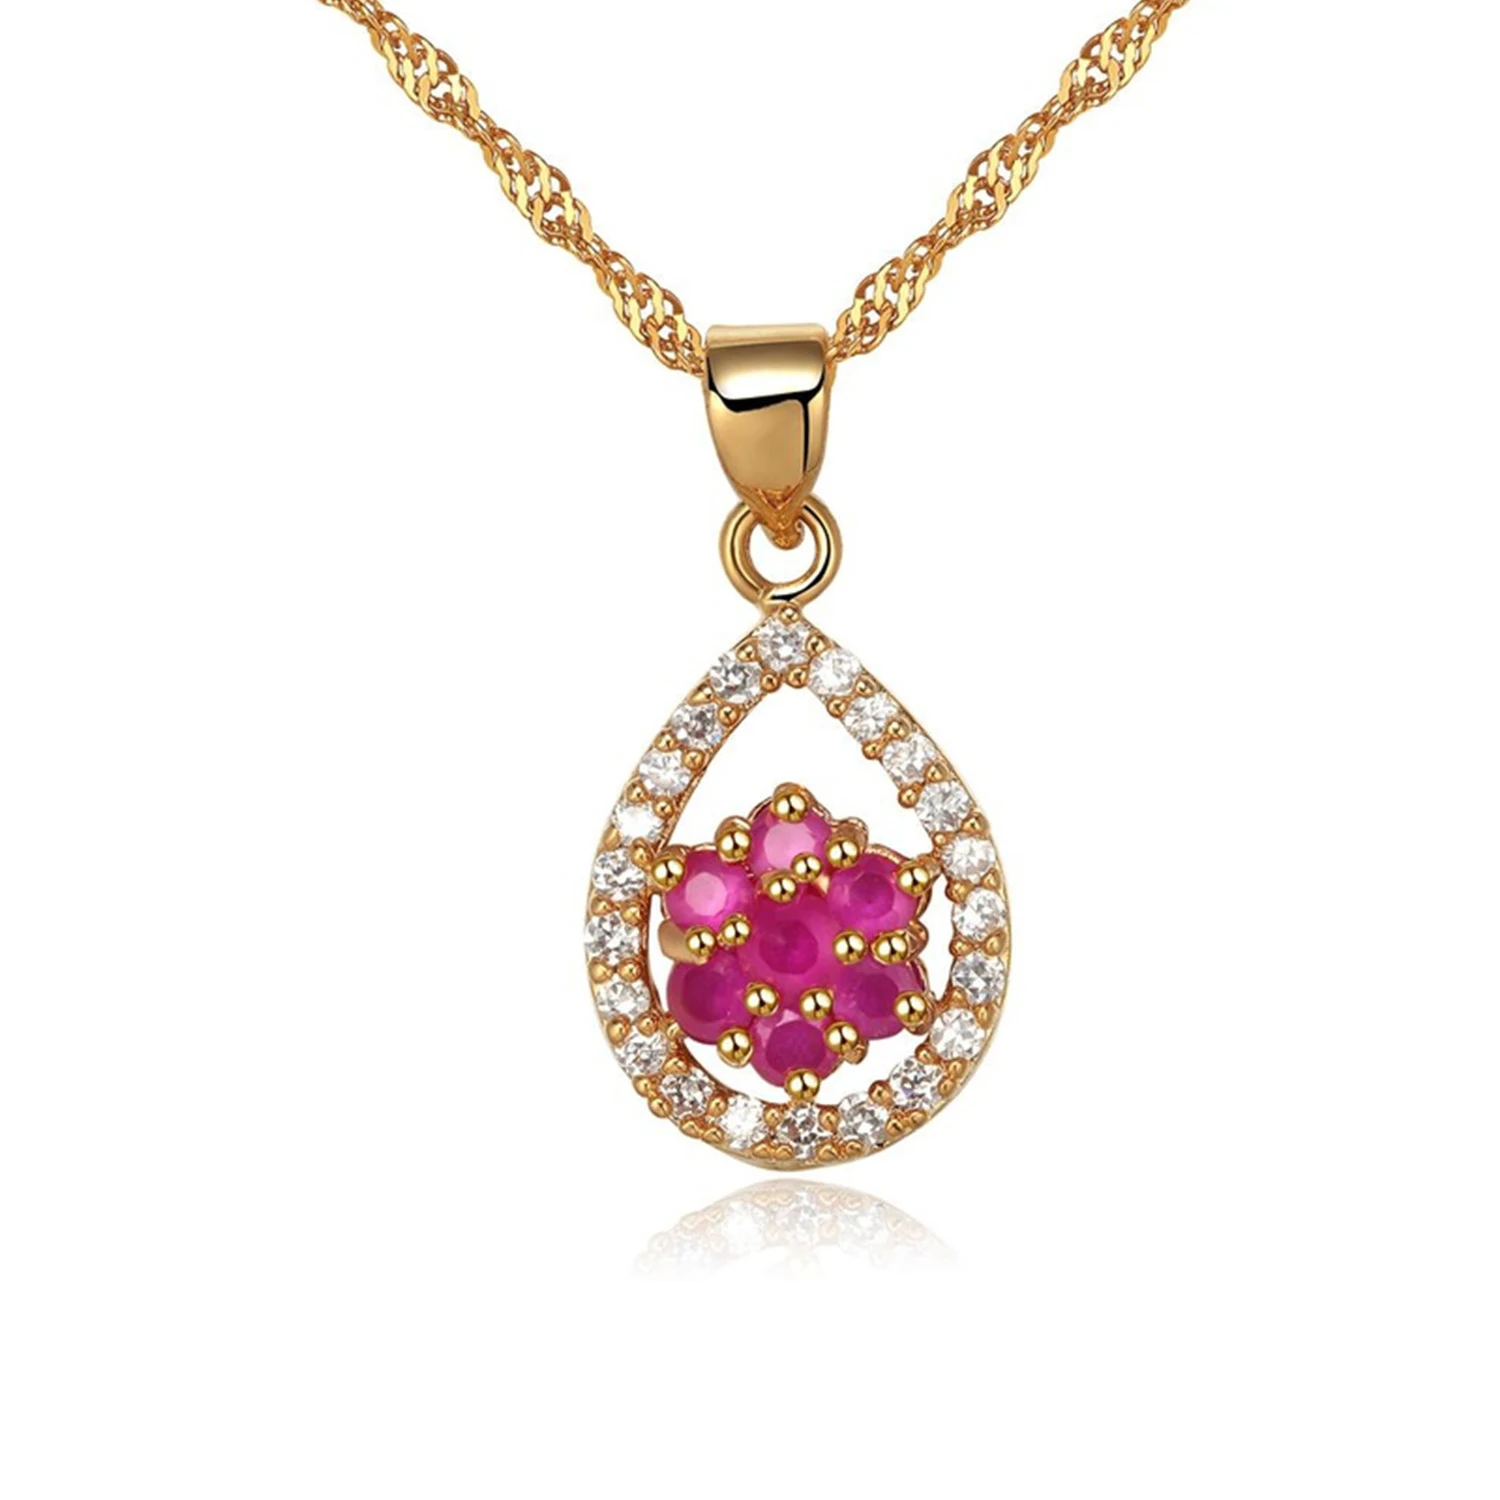 Fashion Jewelry Gold Earrings Pendant Necklace Ring Geometric Synthetic Ruby Teardrop Jewelry Set (图5)